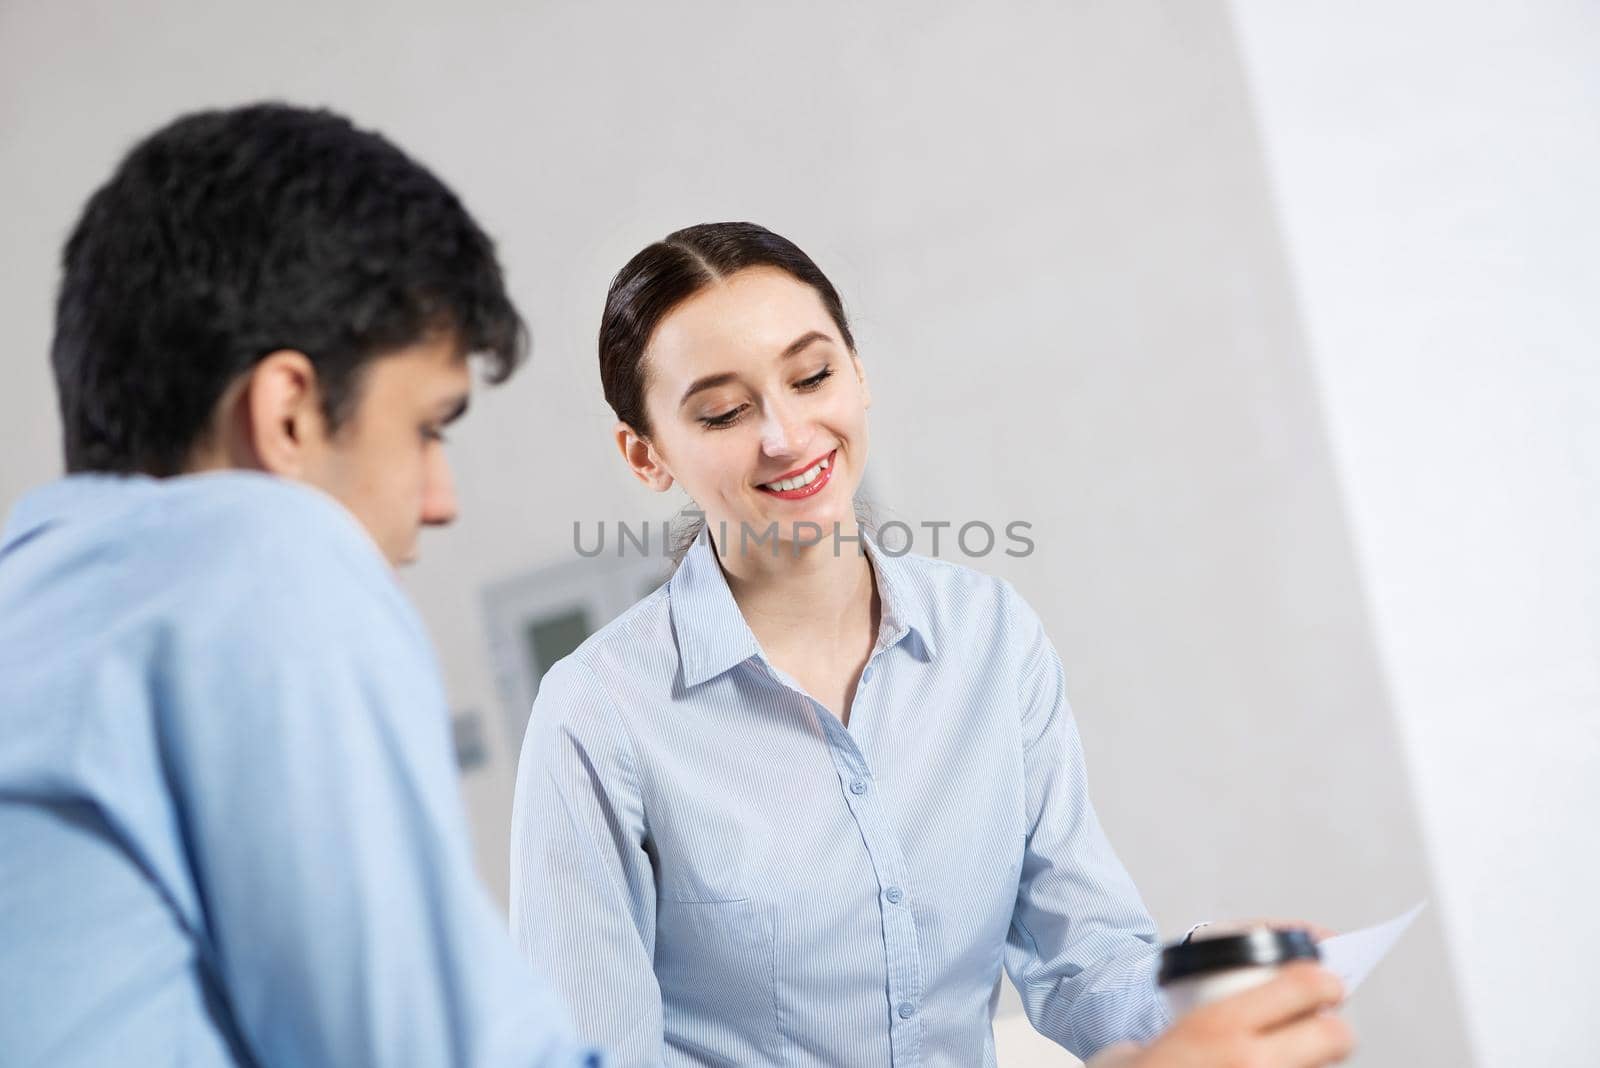 portrait of a young attractive woman discussing documents with a colleague. teamwork conceppt